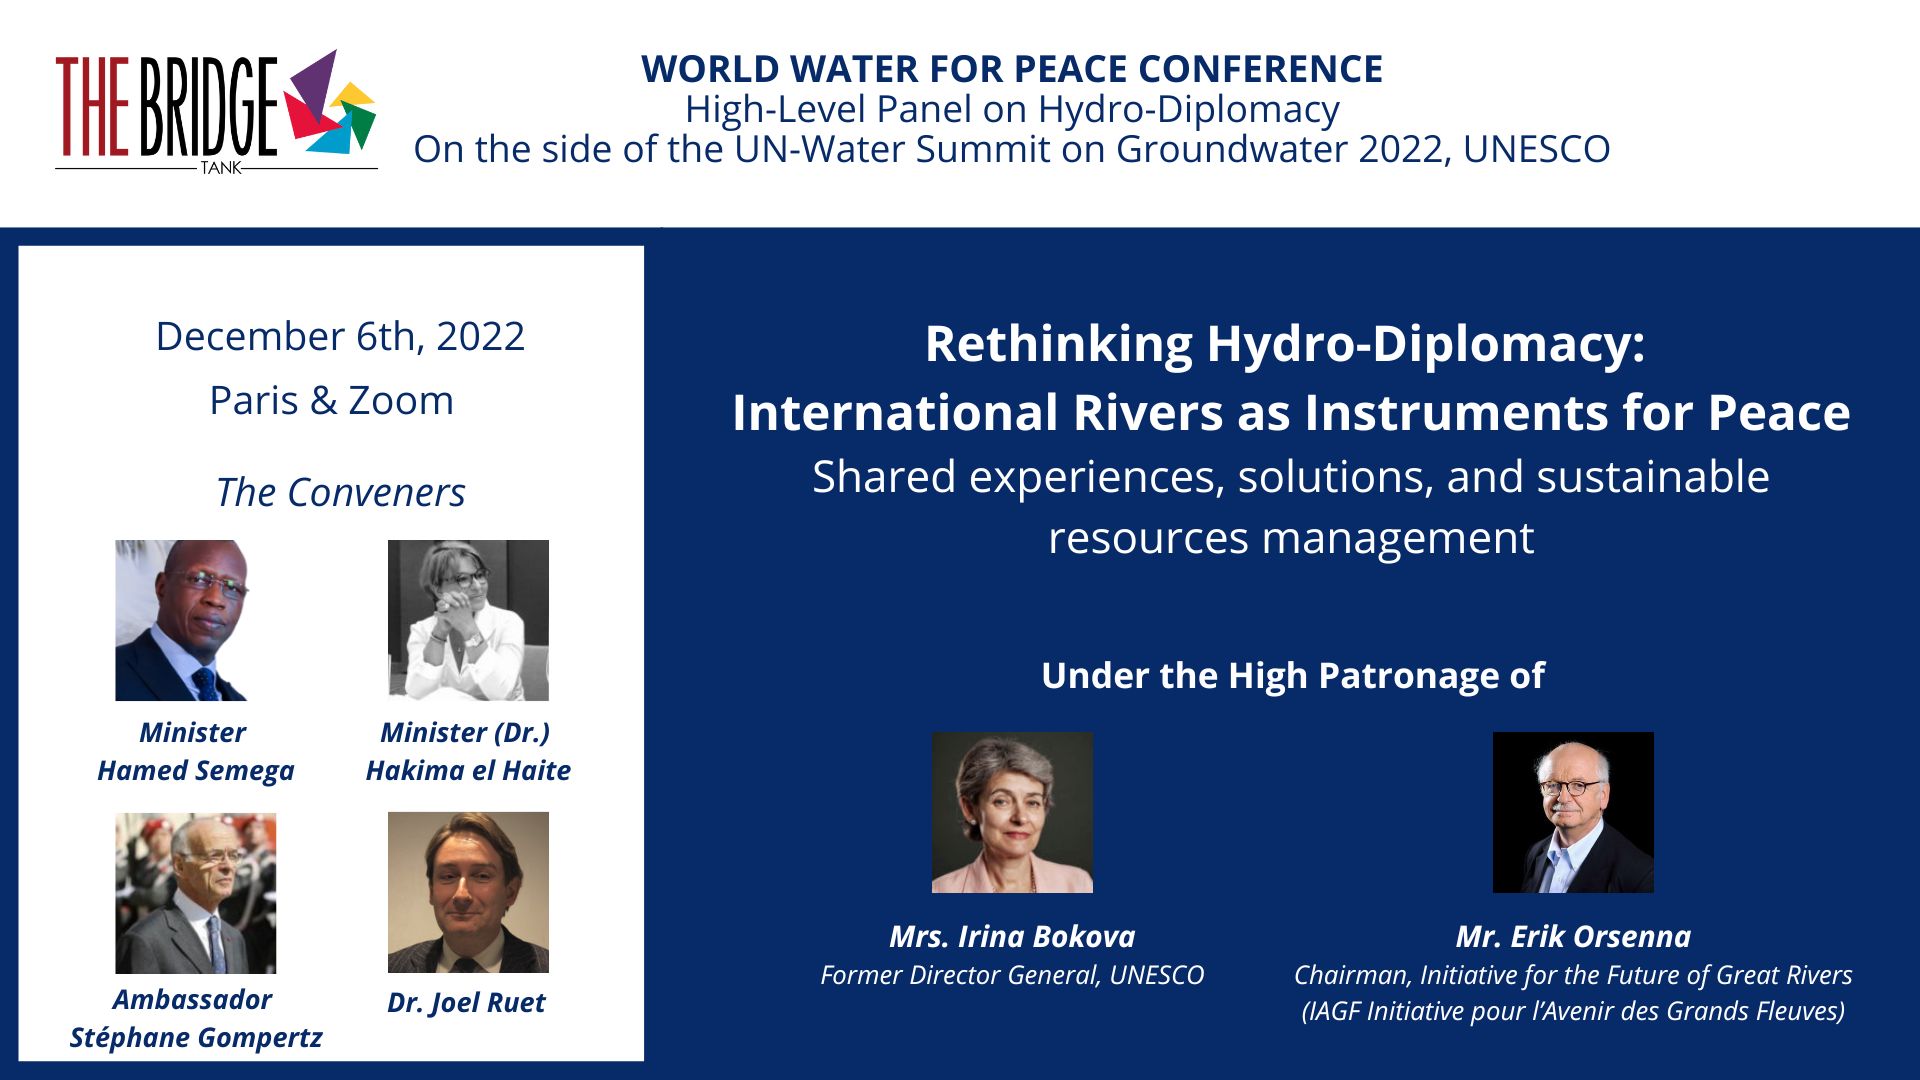 Rethinking Hydro-Diplomacy: The Bridge Tank holds a high-level panel on the side of the UN-Water Summit on Groundwater 2022